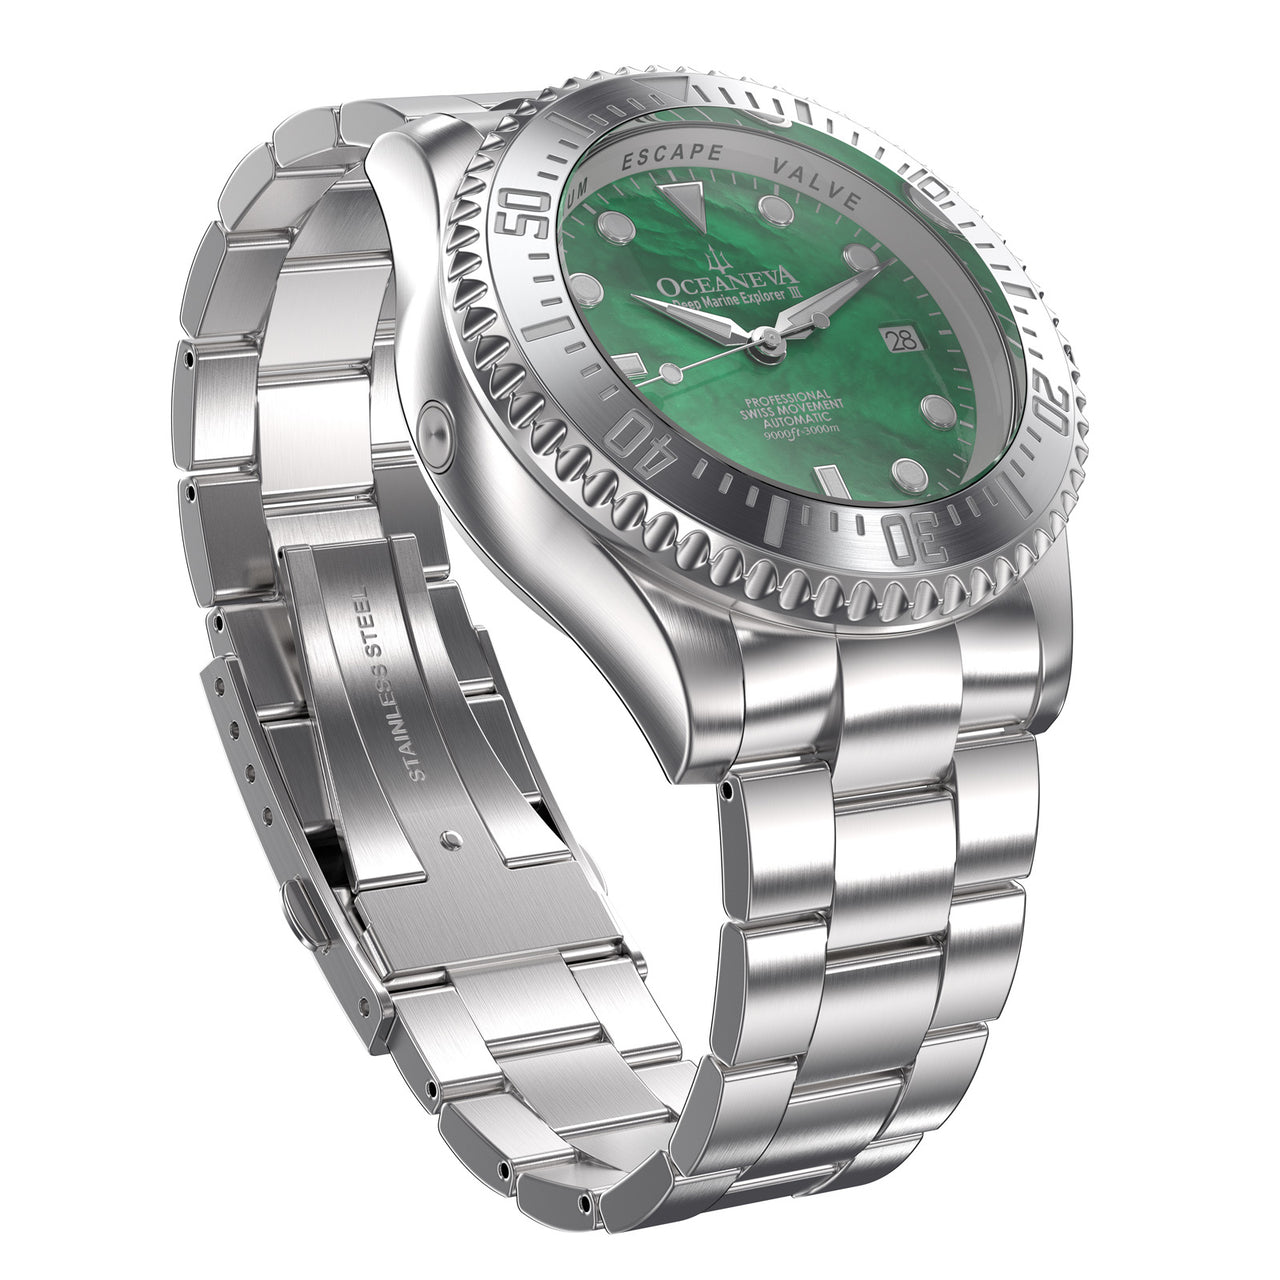 Køre ud sandhed Tilladelse Oceaneva™ Automatic, Swiss Movement Swiss Made Sellita SW200-1 Automatic  STIIIGRMP200ST Green Mother of Pearl Dive Watches Online Under 1500 –  Oceaneva Extraordinary Dive Watches